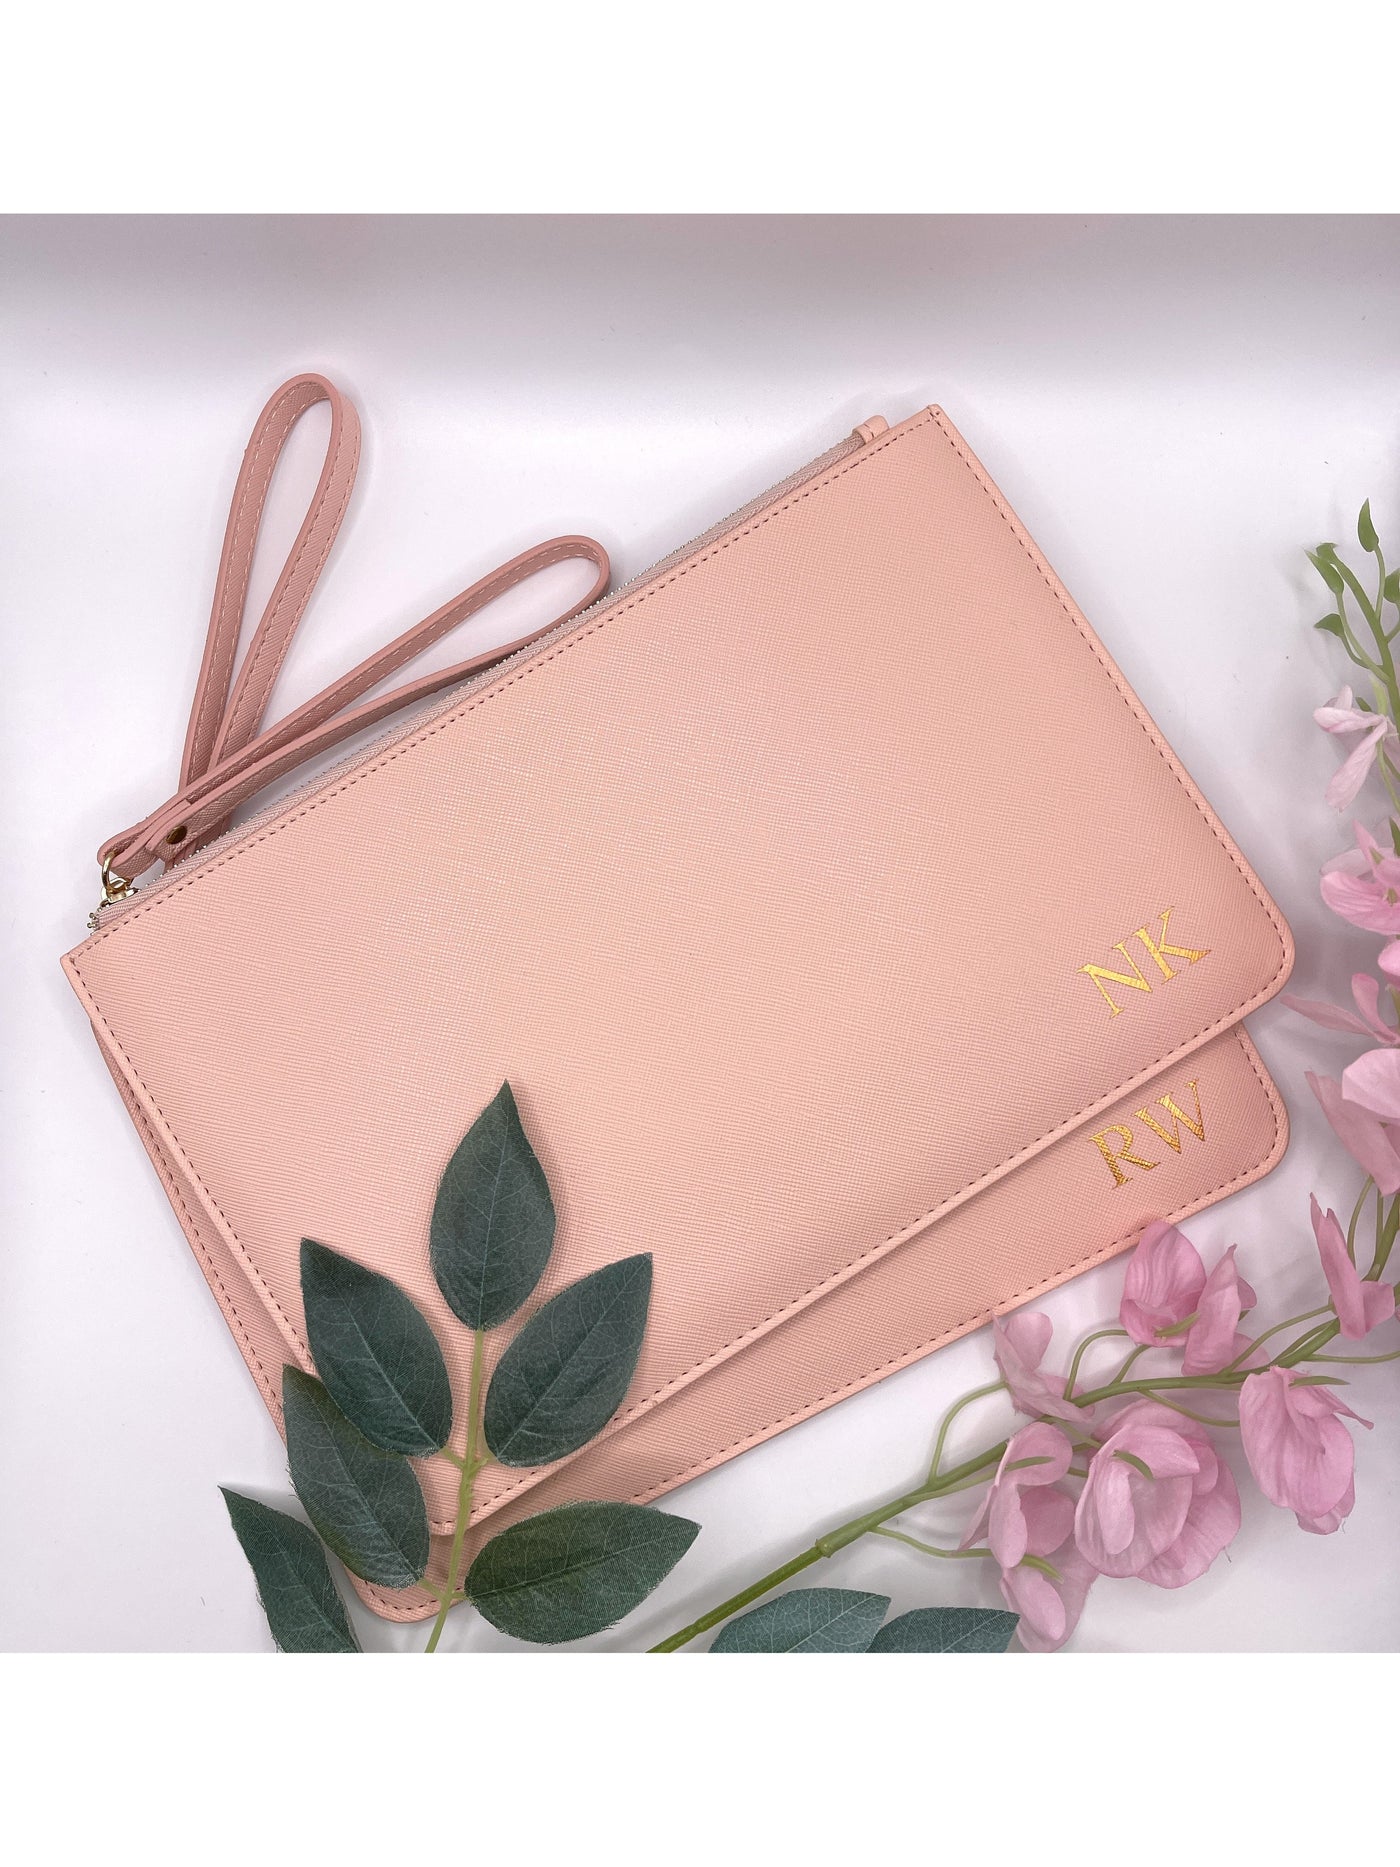 Personalised Clutch bag with monogram